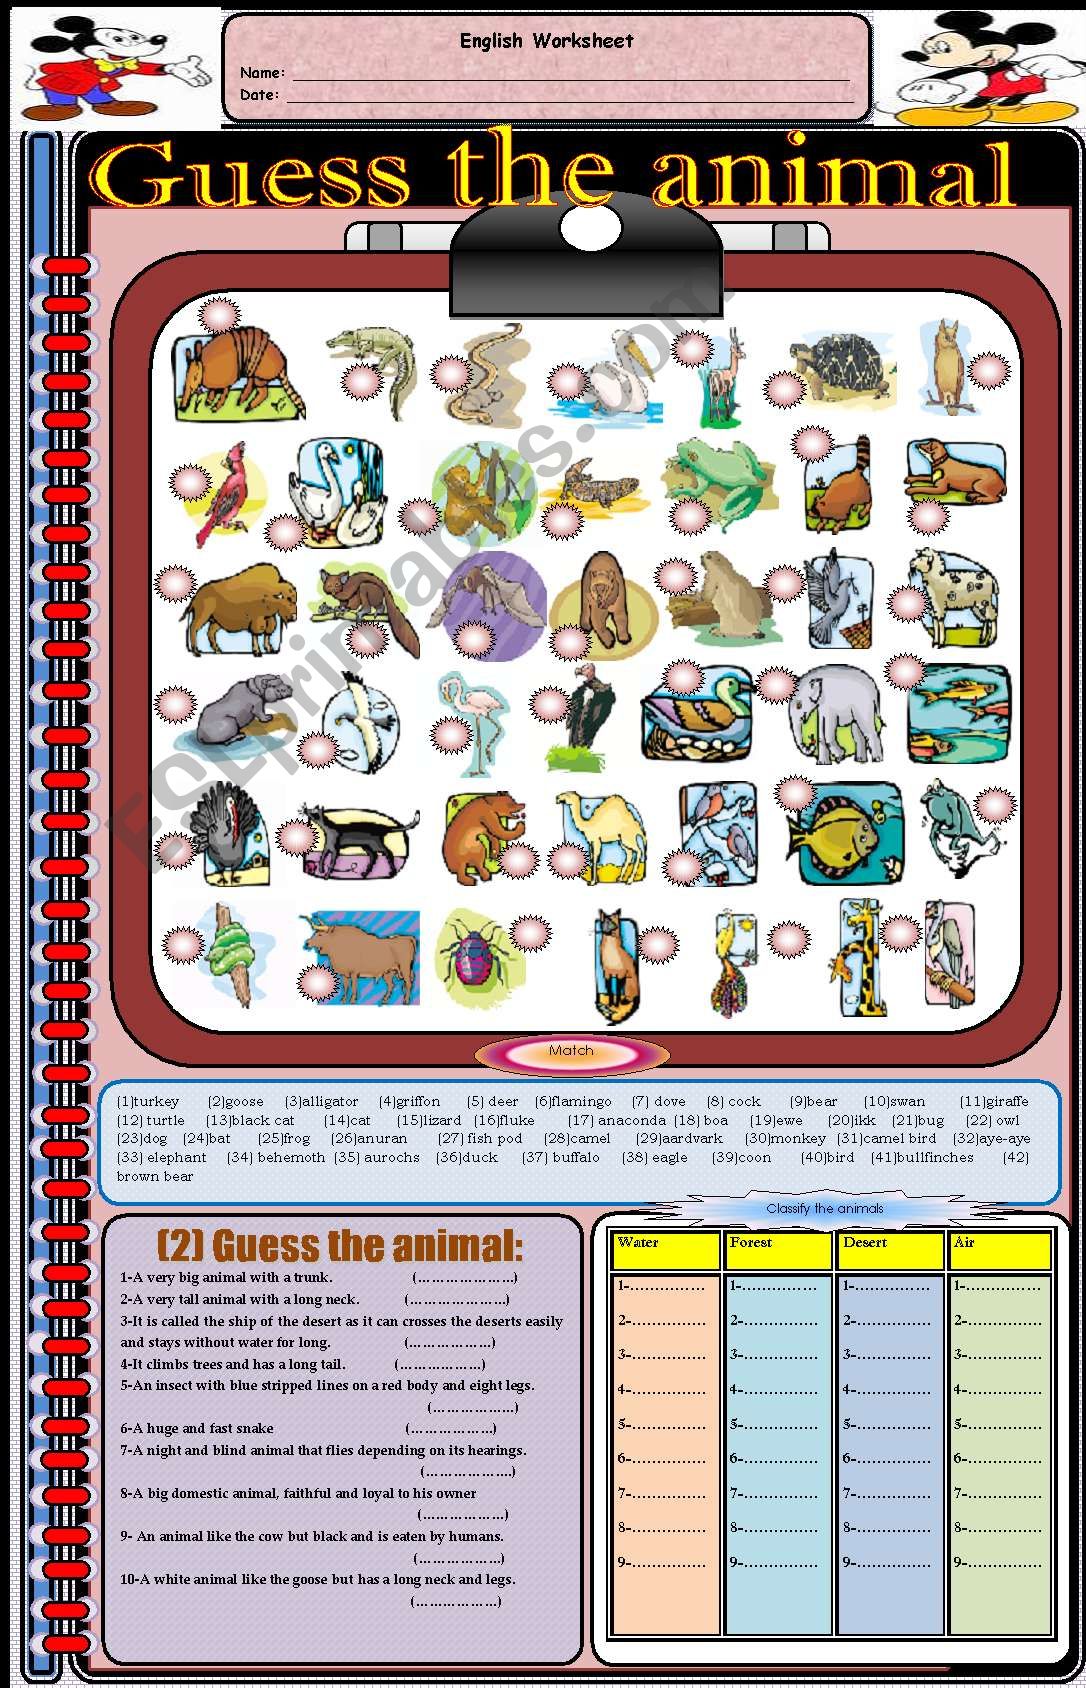 guess-the-animal-part-1-esl-worksheet-by-tareq